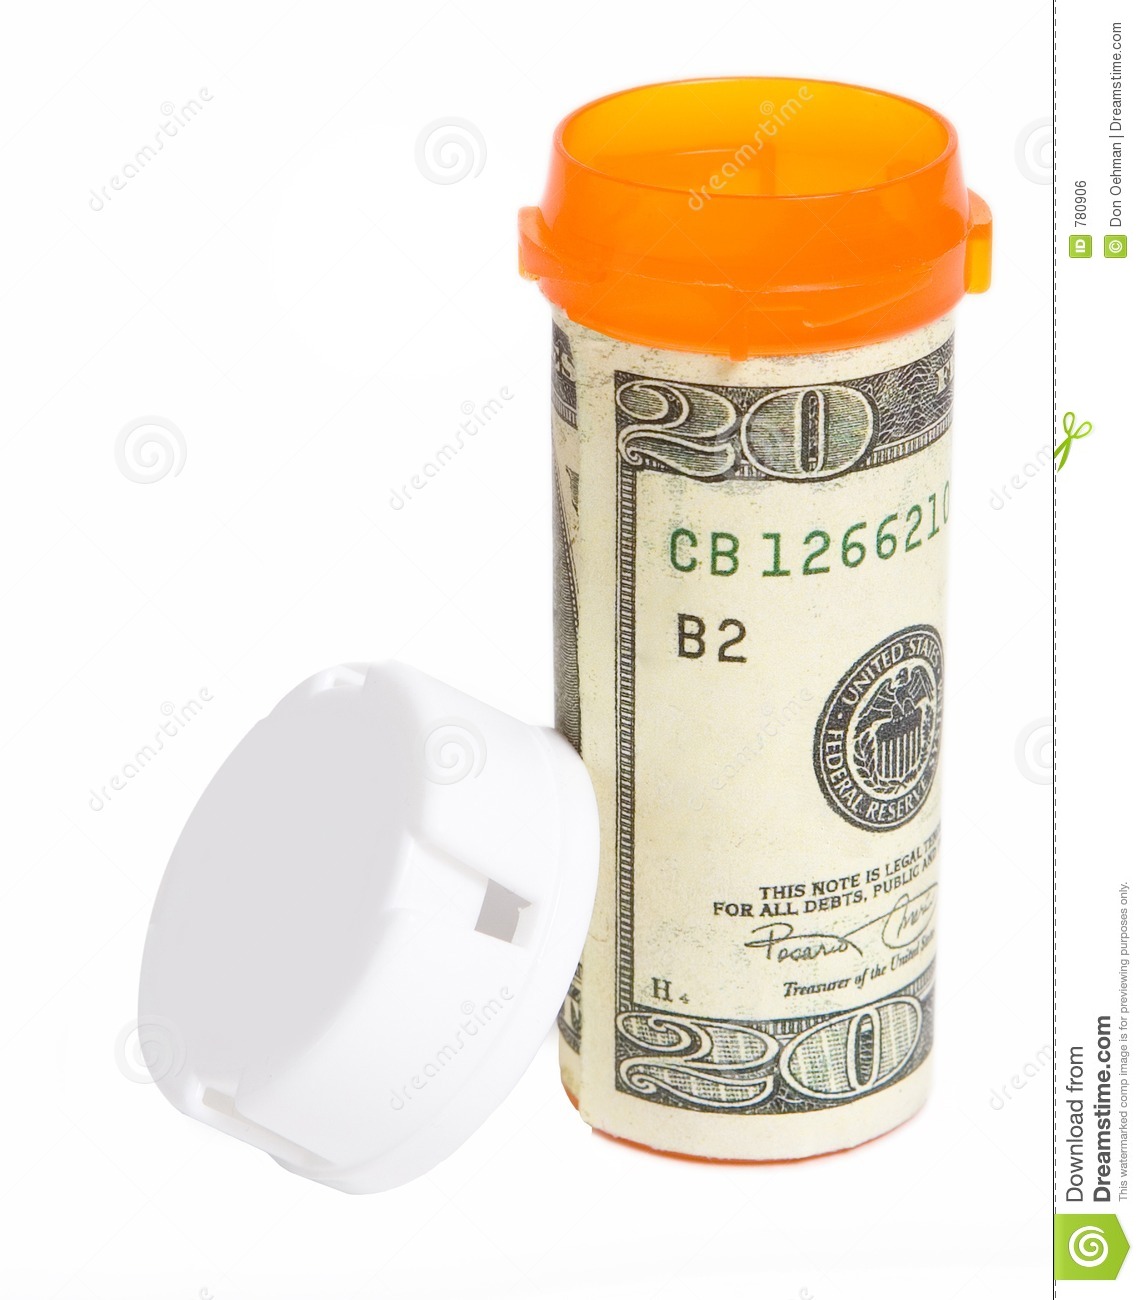 Prescription Bottle Wrapped In A  20 Bill Royalty Free Stock Image